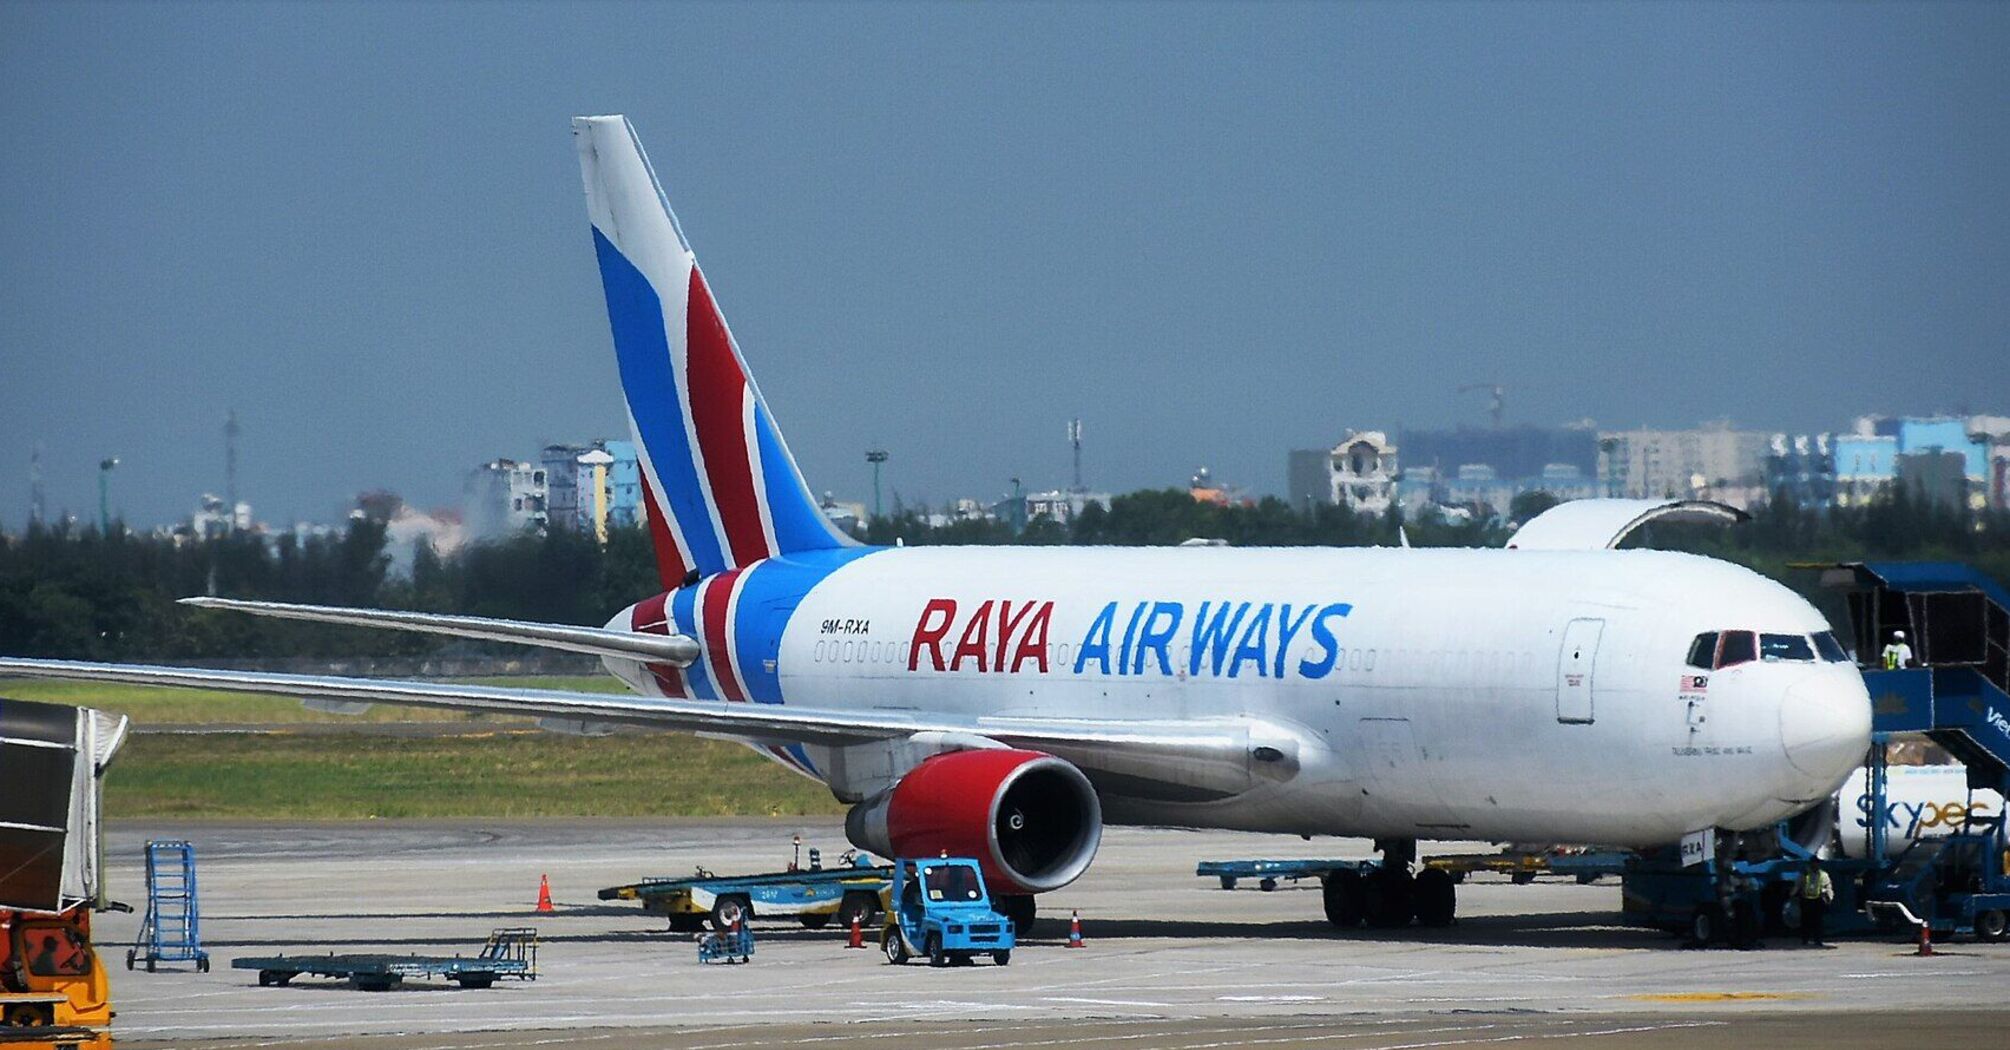 Raya Airways Compensation for Delayed or Cancelled Flights